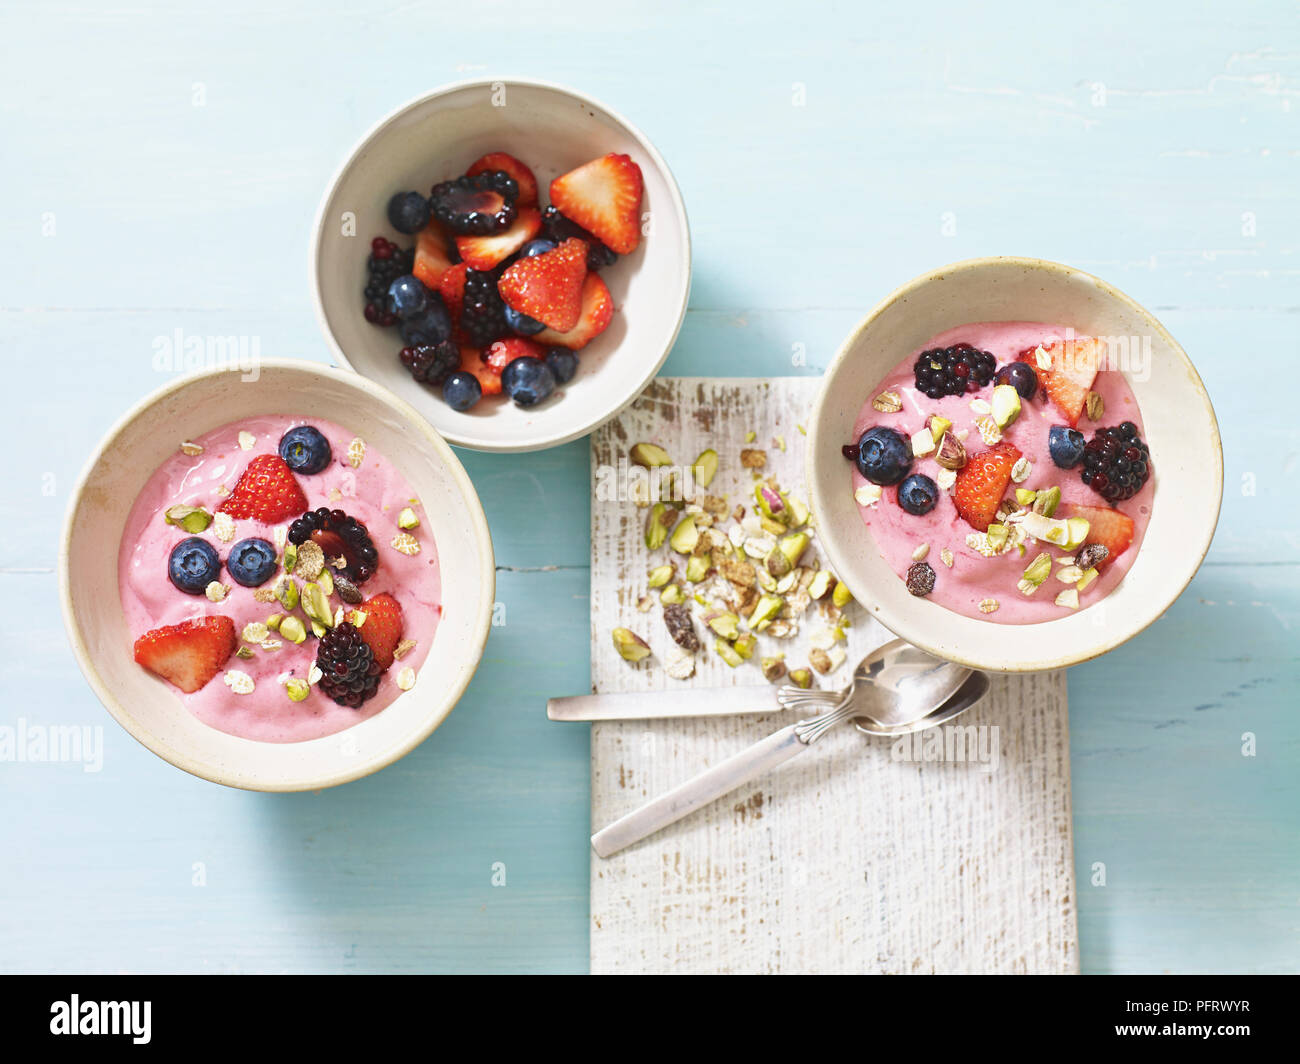 Banana and berry smoothie bowl Stock Photo